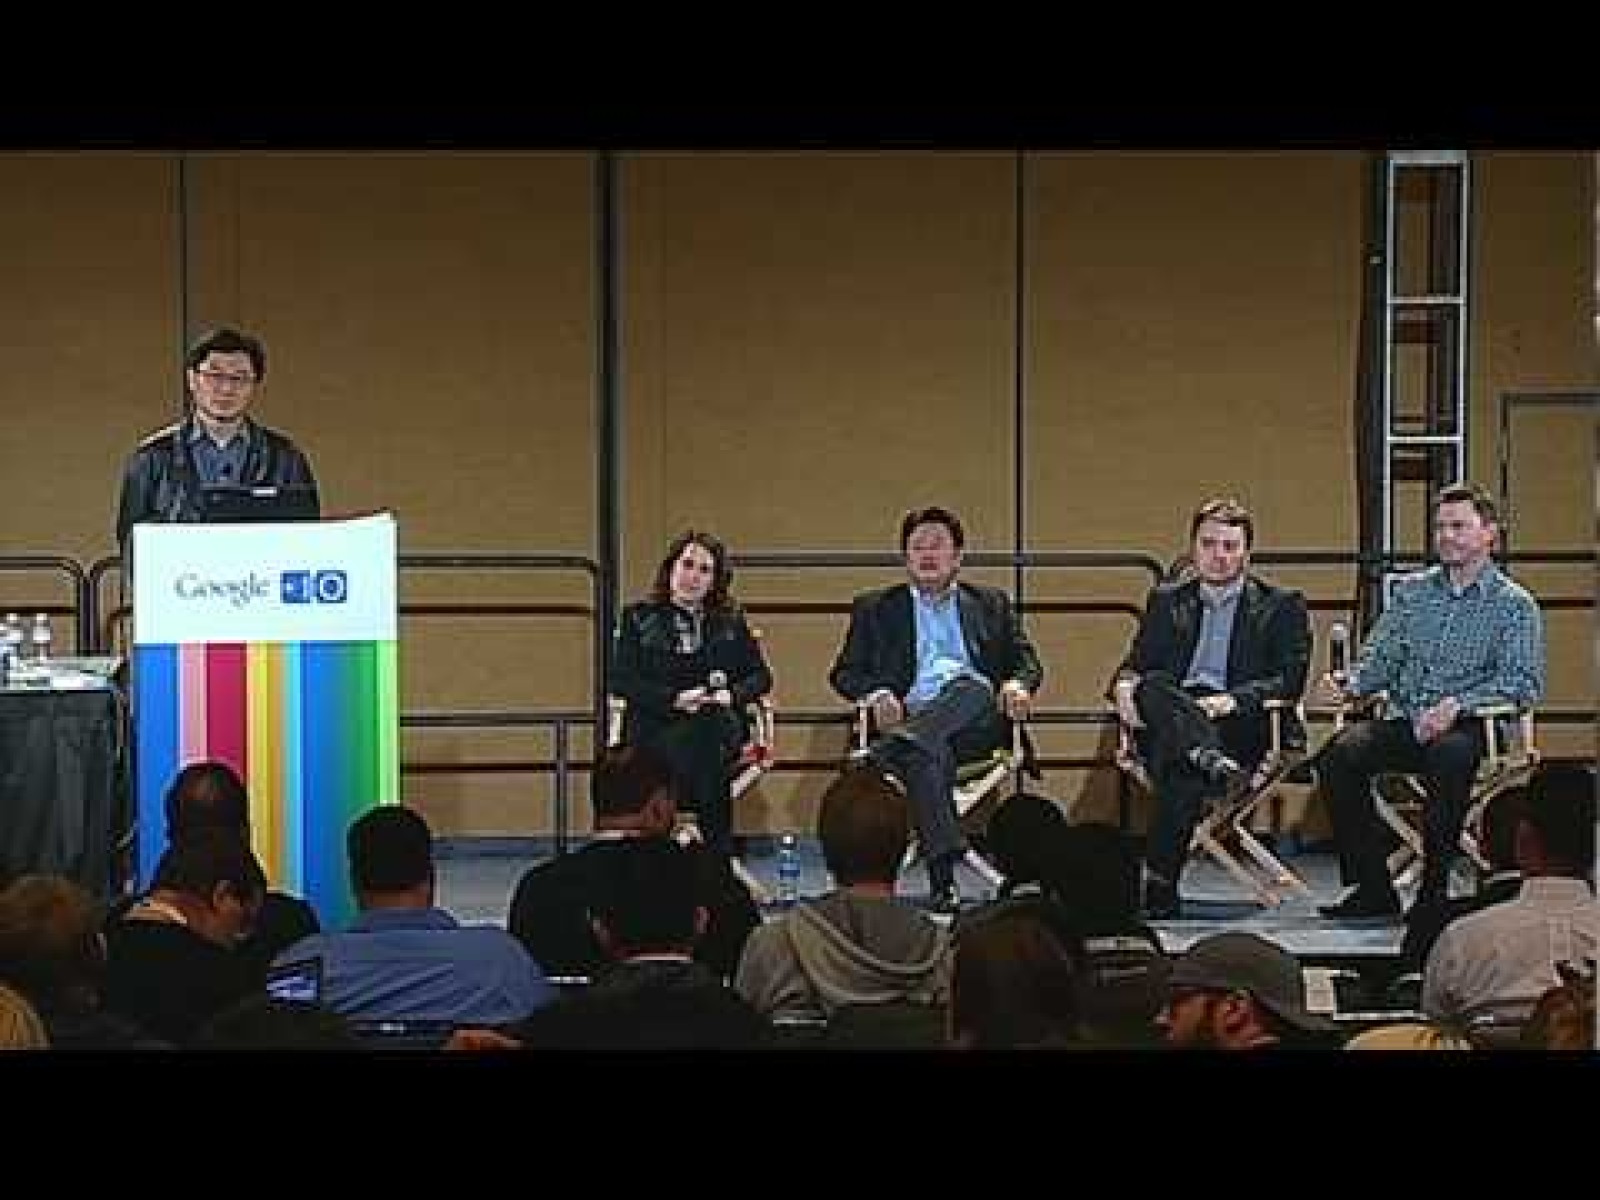 Google I/O 2010 - Fireside chat w/ Android handset partners